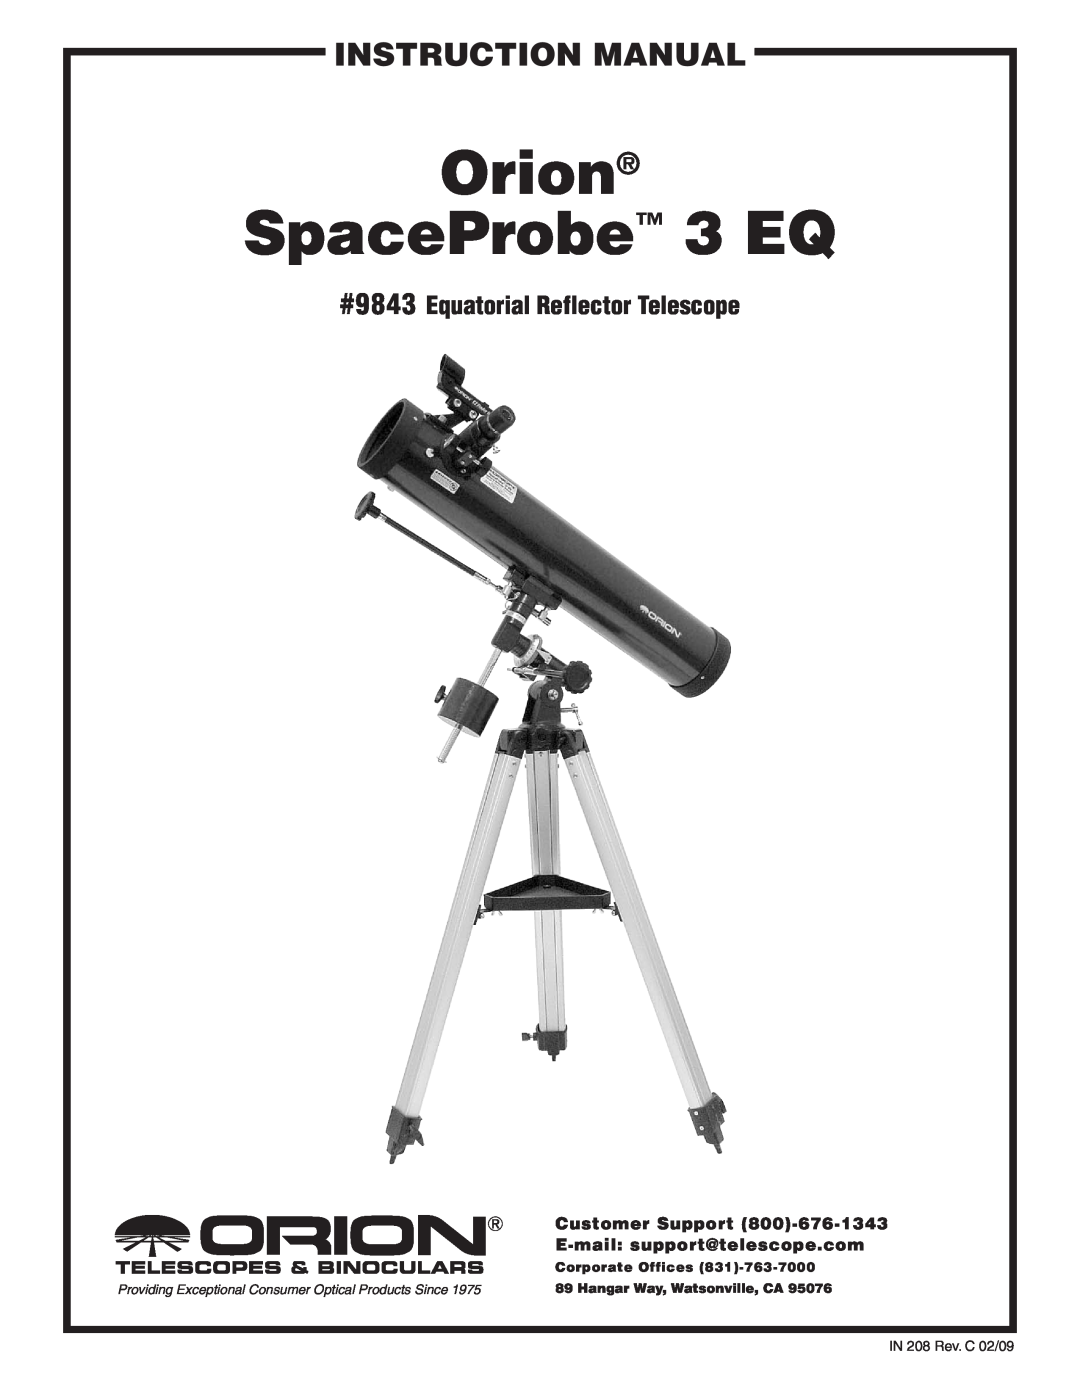 Orion instruction manual #9843 Equatorial Reflector Telescope, Customer Support 800‑676-1343, Orion SpaceProbe 3 EQ 